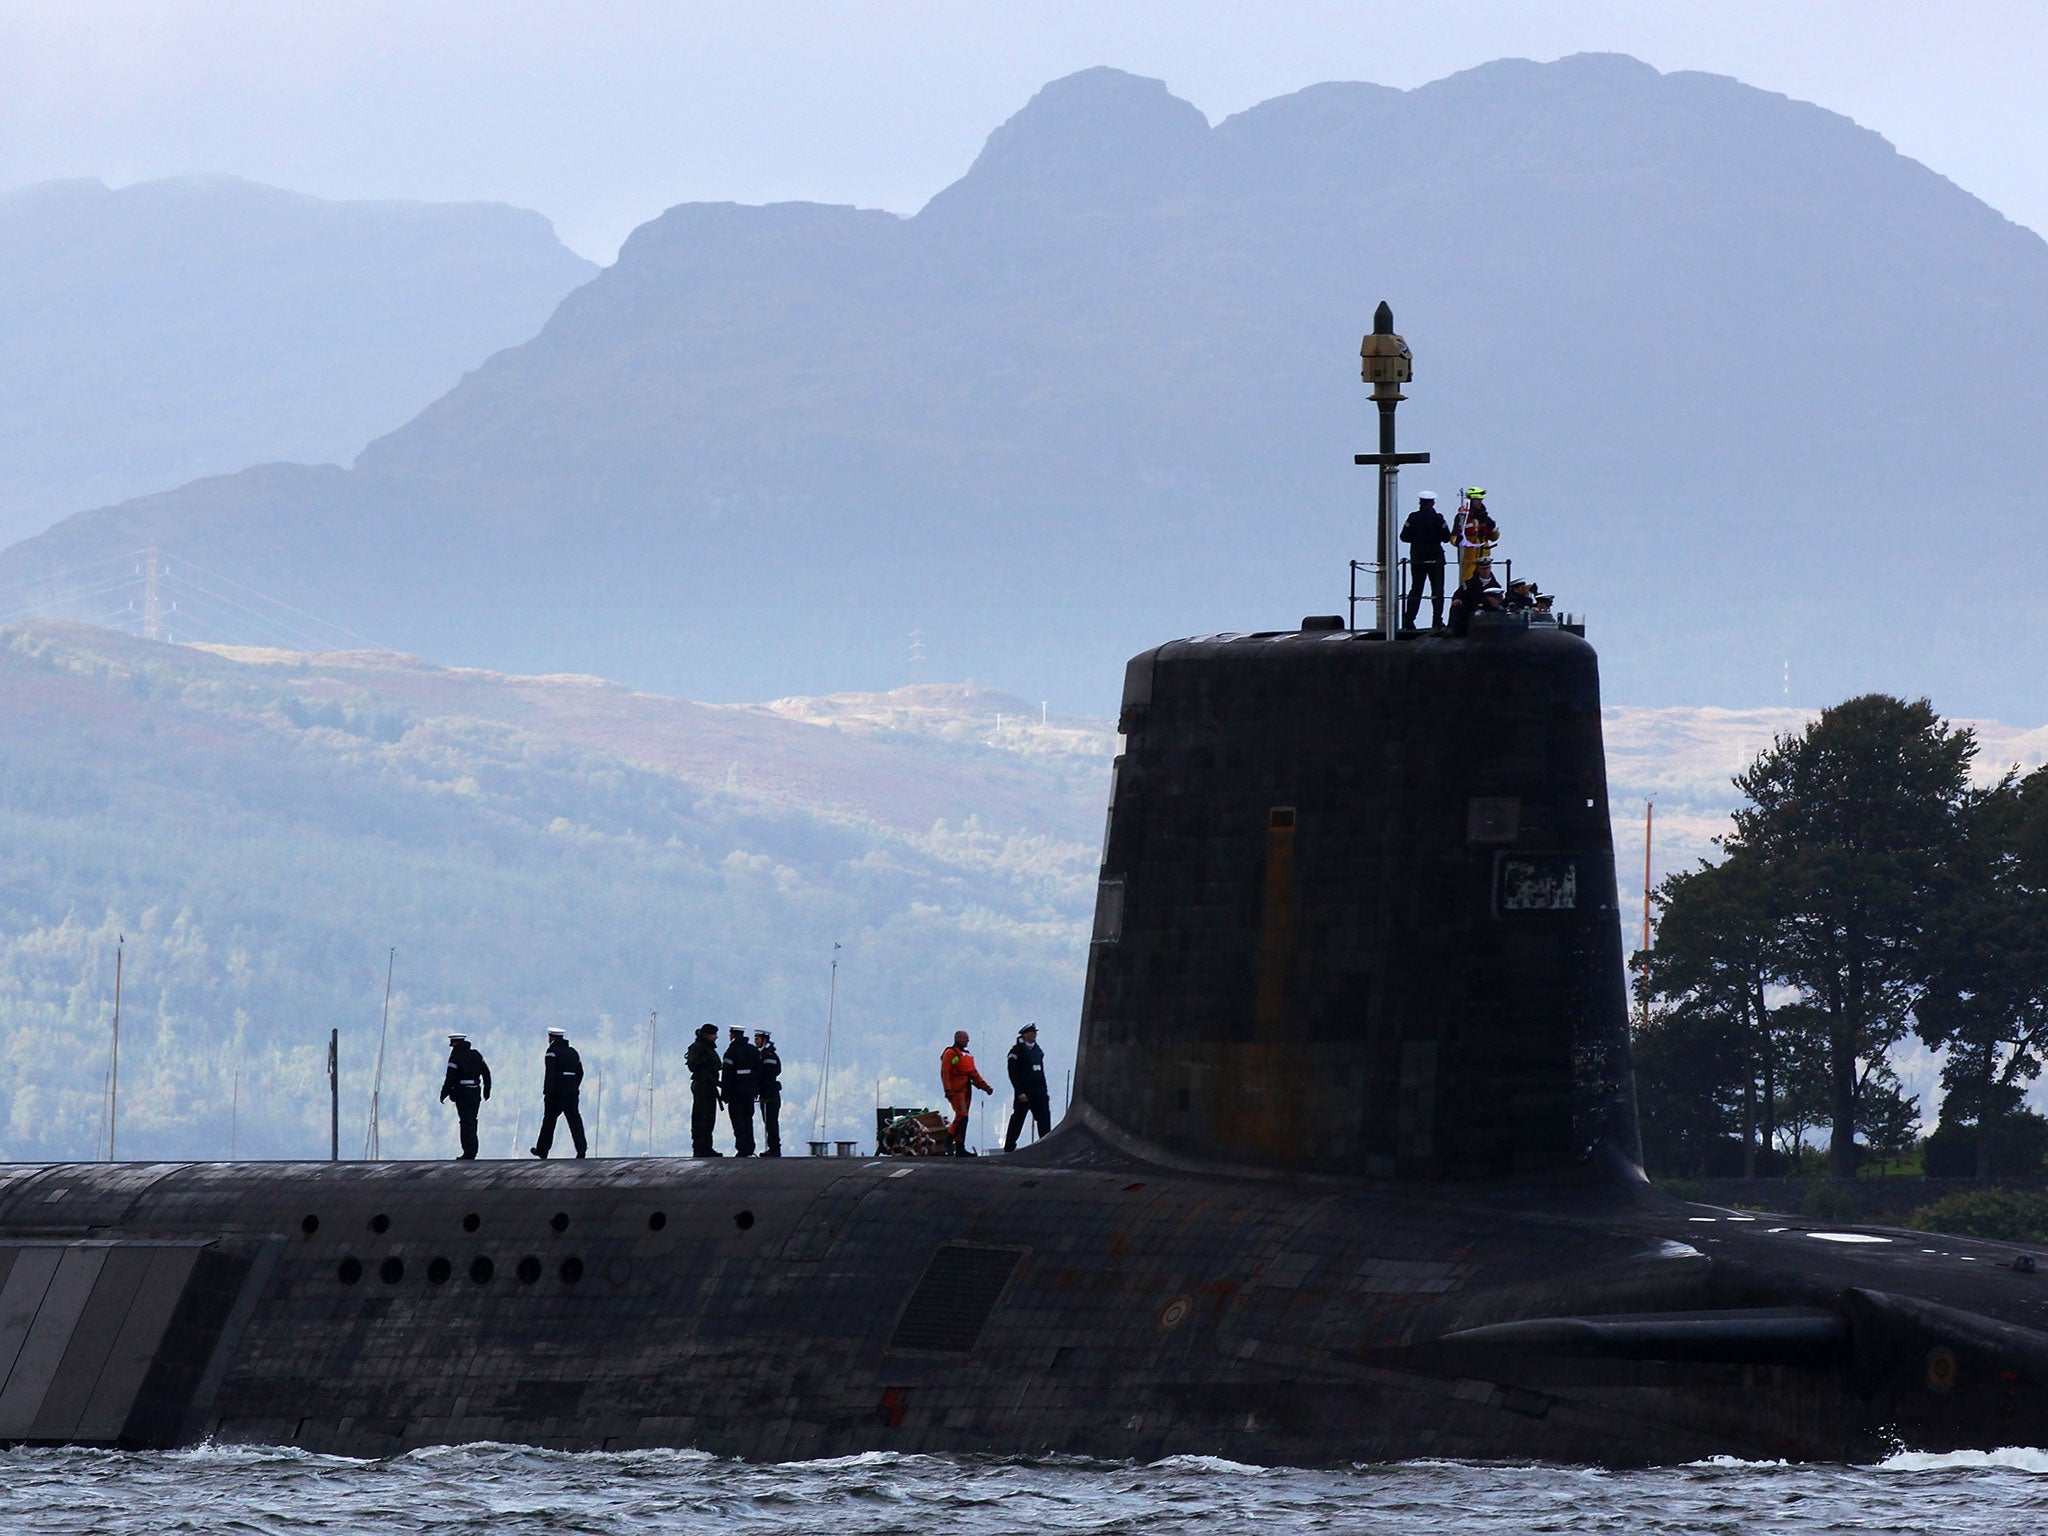 &#13;
The vote on Trident’s successor in April will expose Labour divisions &#13;